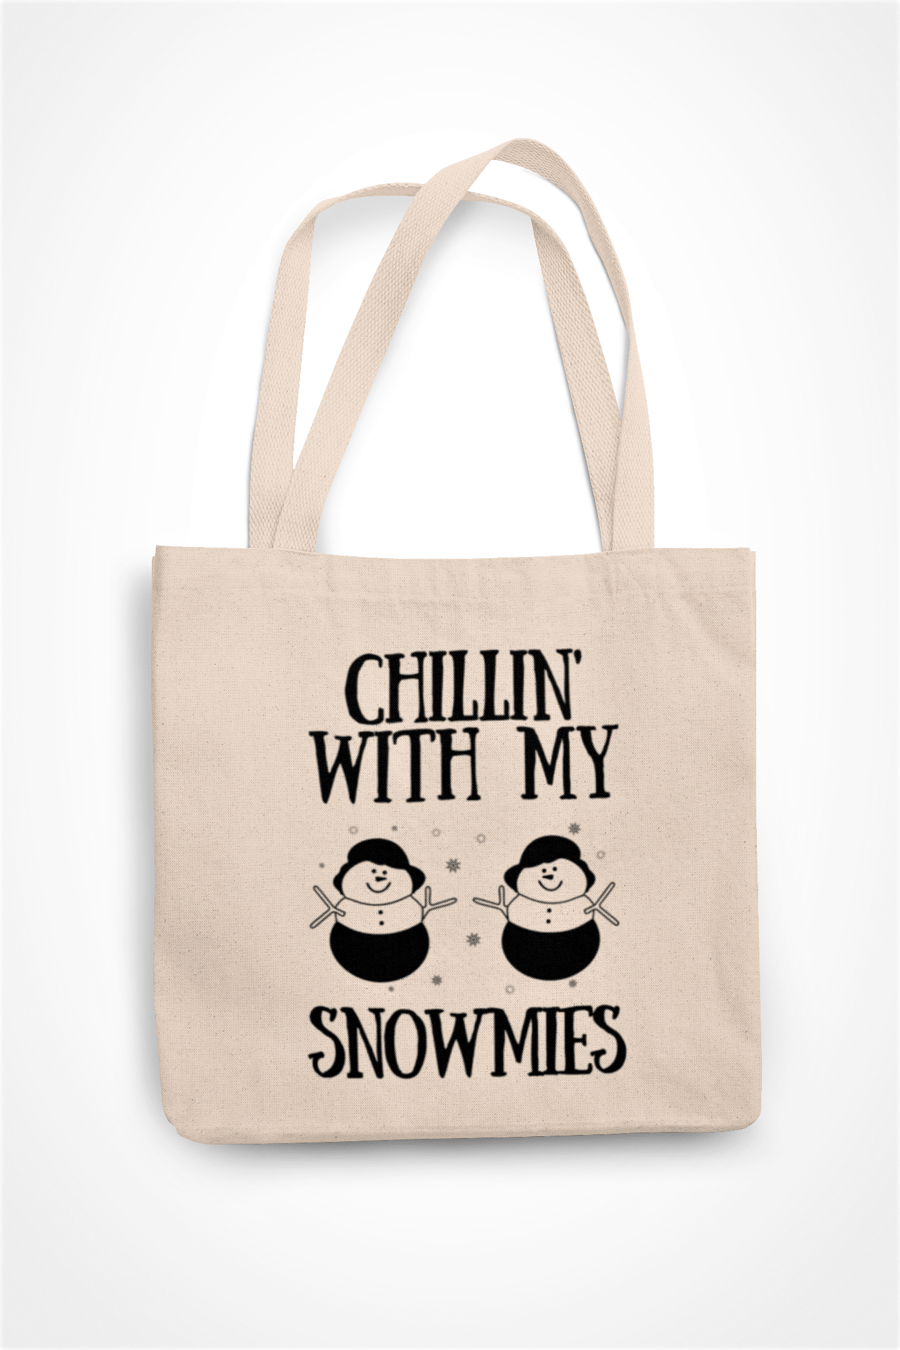 Chillin With My SNOWMIES Christmas Tote Bag - Shopper Bag xmas Gift